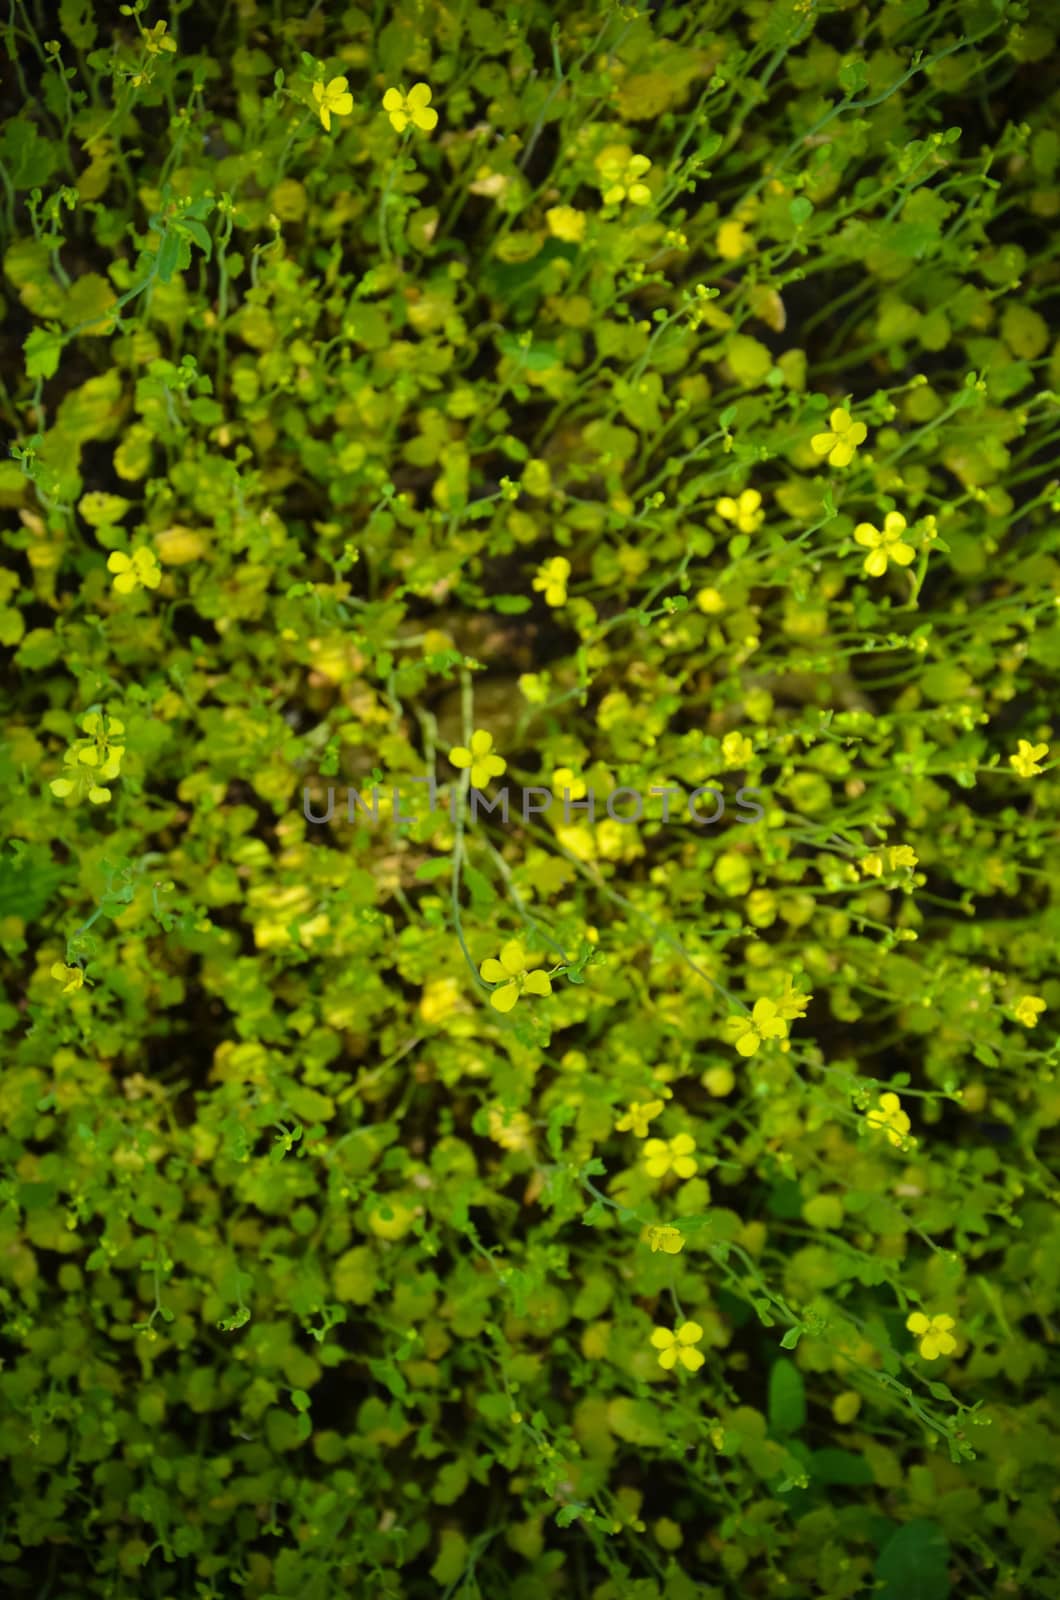 Yellow flowers on a blured green and yellow background